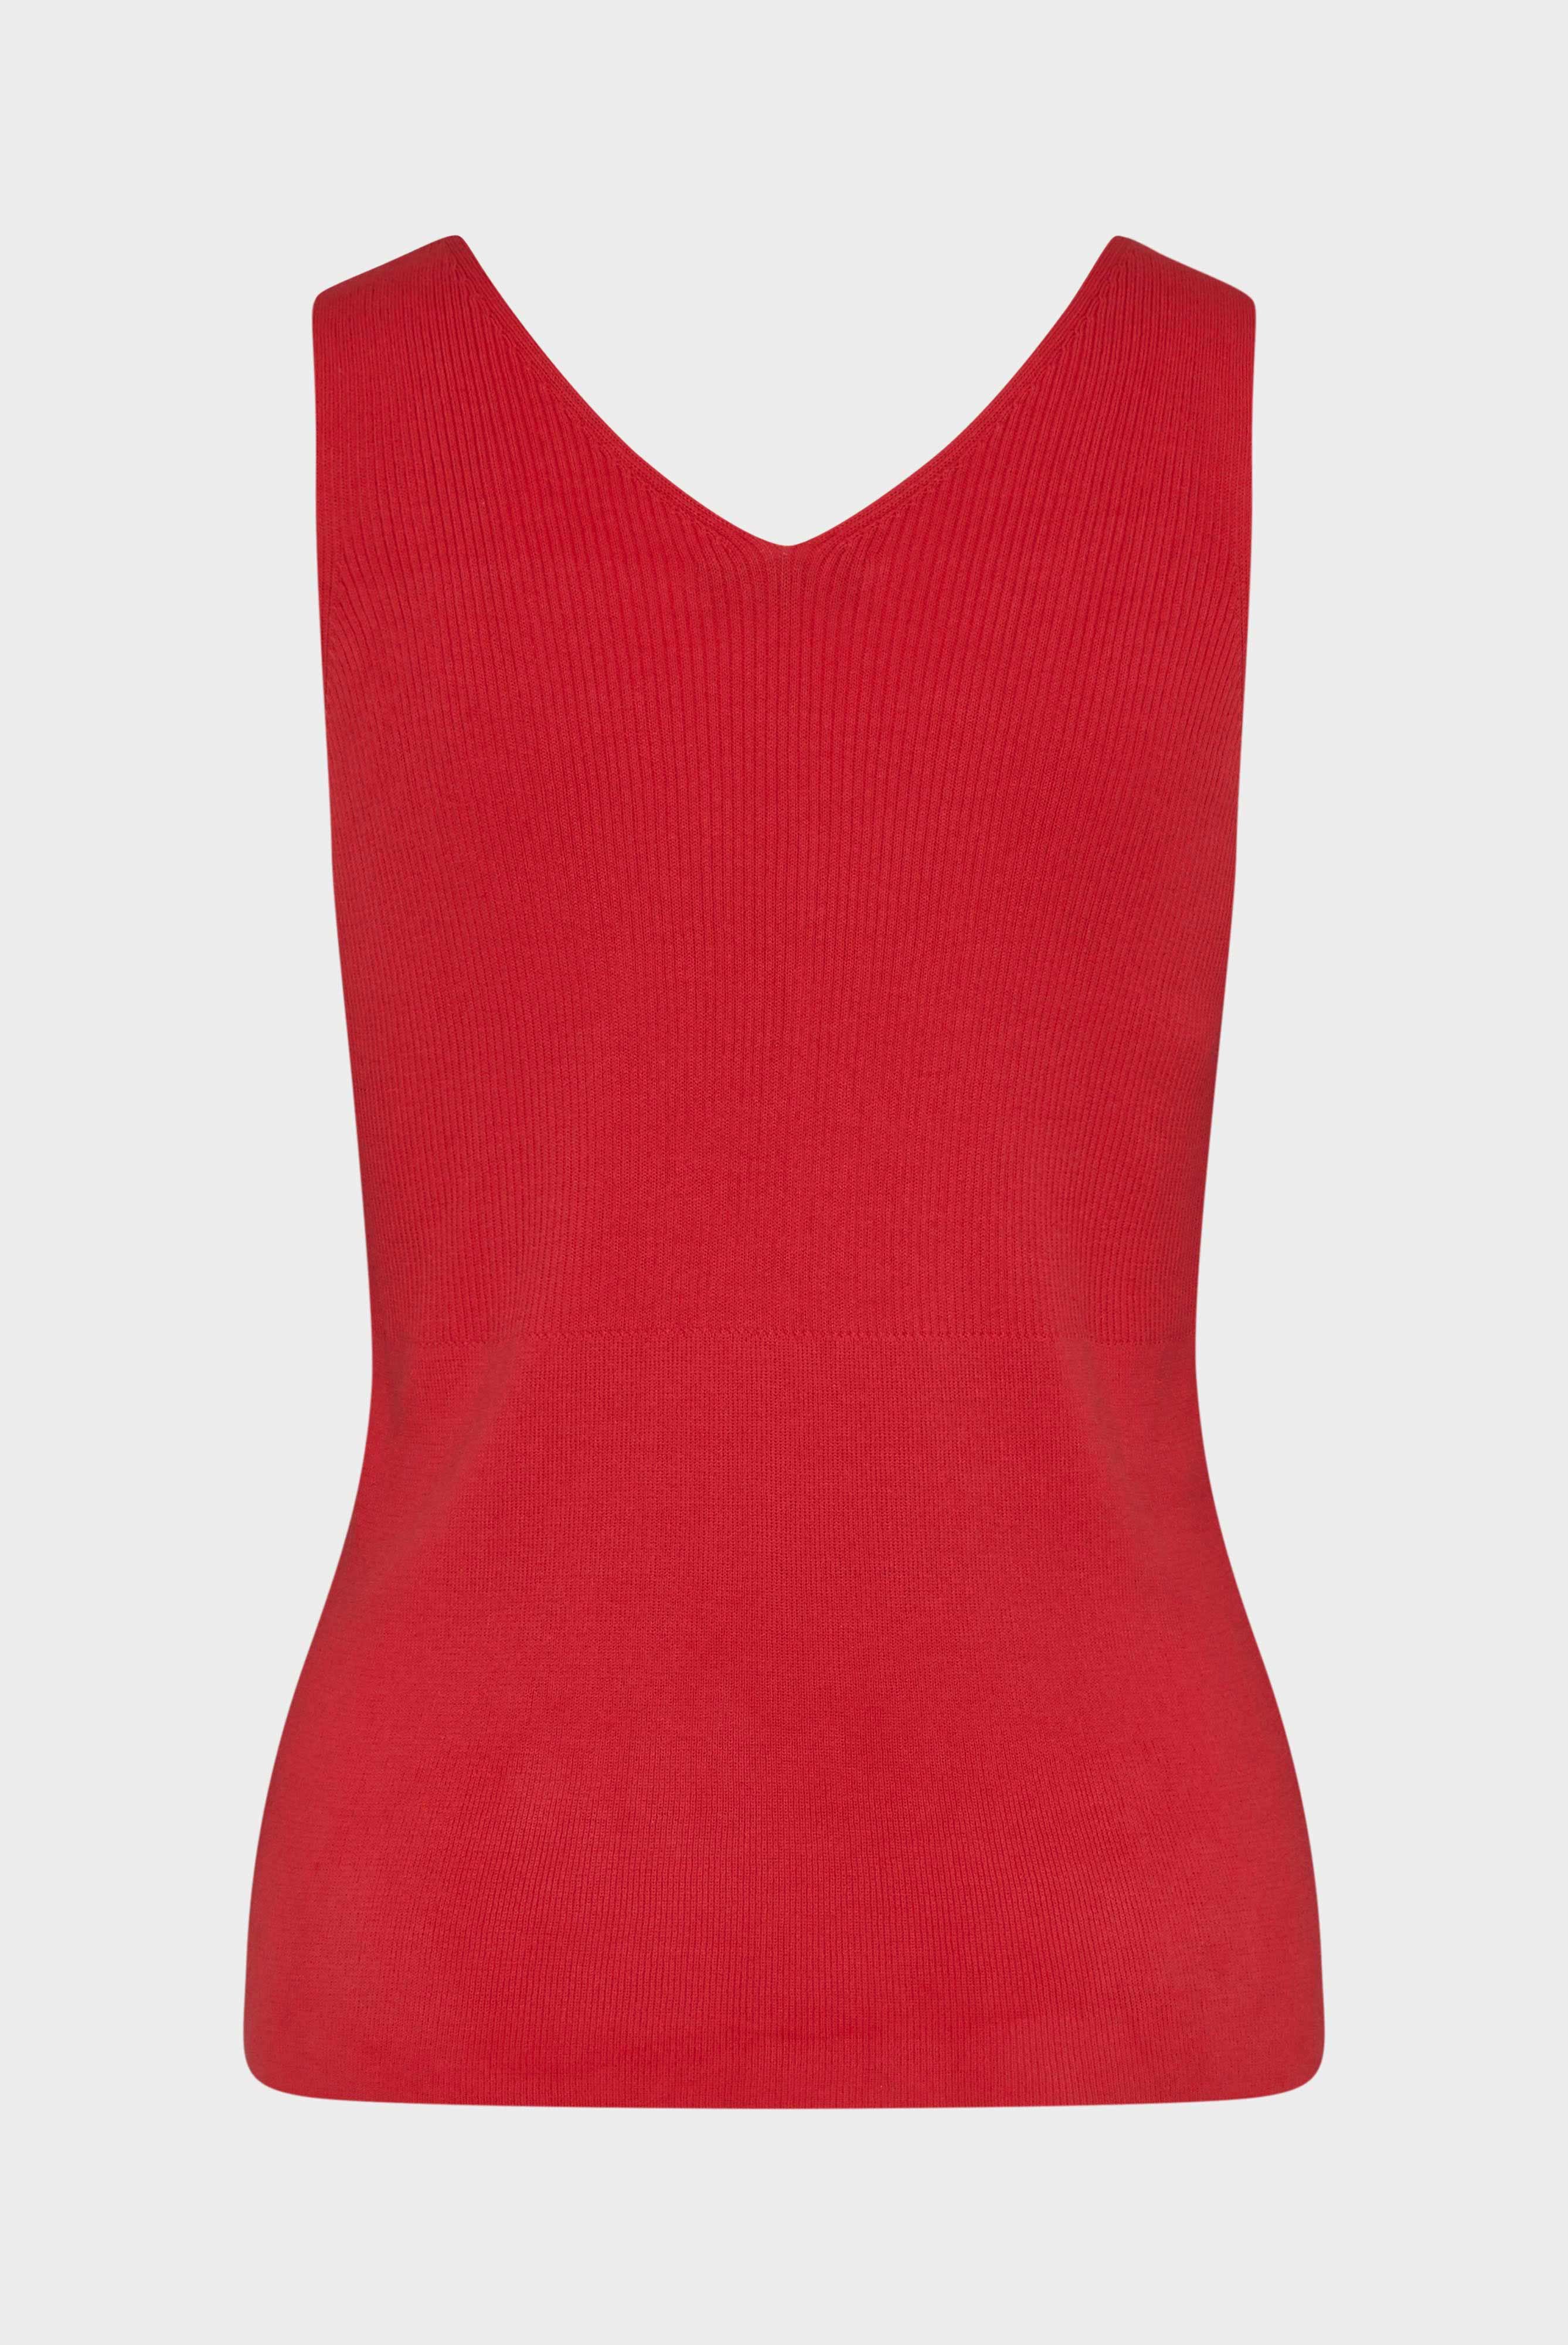 Tops & T-Shirts+Slim fit cotton tank top rot/rose+09.9966..S00192.540.XL